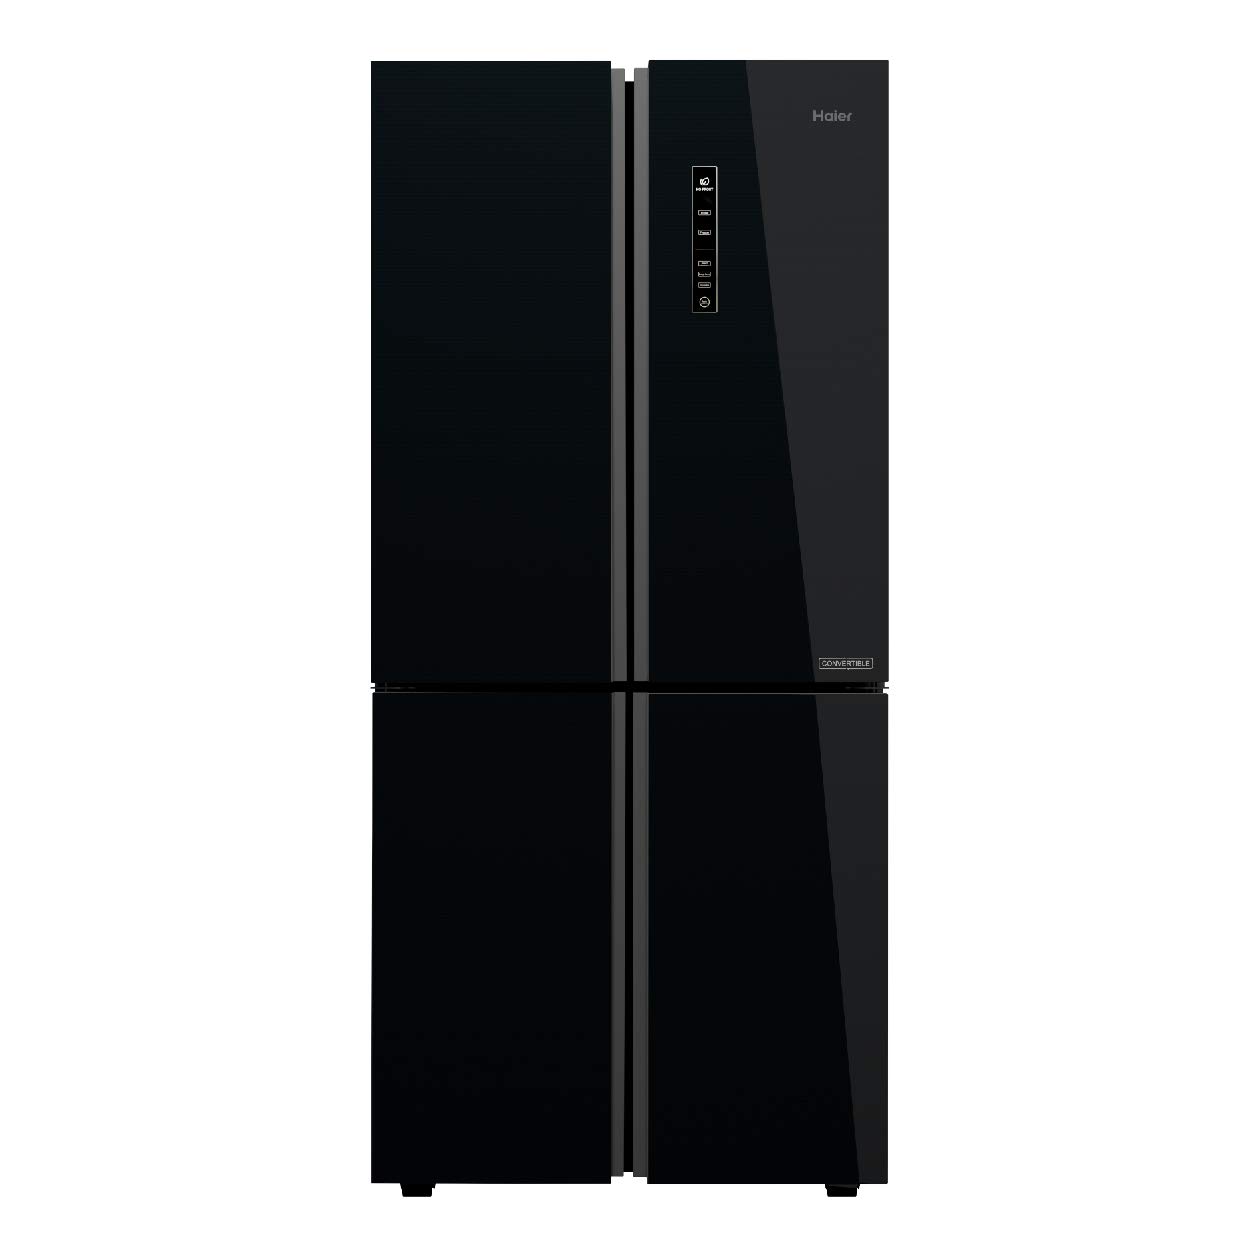 Haier 630 Liters Side-by-Side Refrigerator: Top-Notch Cooling Performance for Your Kitchen